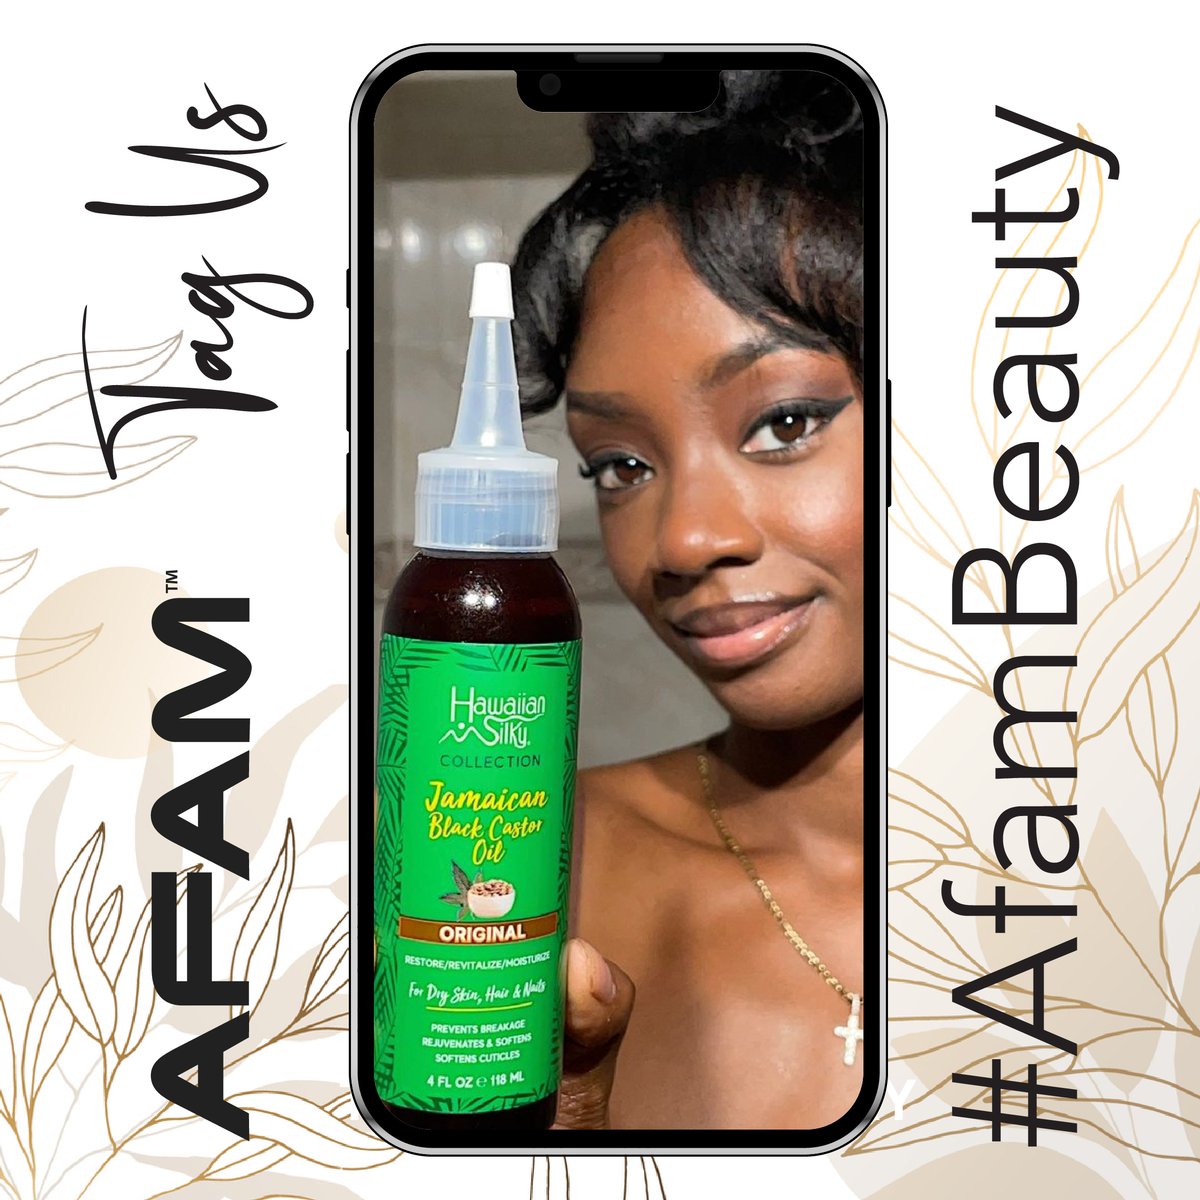 Tag us whenever you use any product under AFAM with #AfamBeauty. We love to see all the magic you all create🤍
.
.
  
#naturalhair #type2hair #type3hair #type4hair #naturalhairdaily #naturalista #curlyhair #teamnatural #naturalhaircommunity #curls #naturalhairstyles